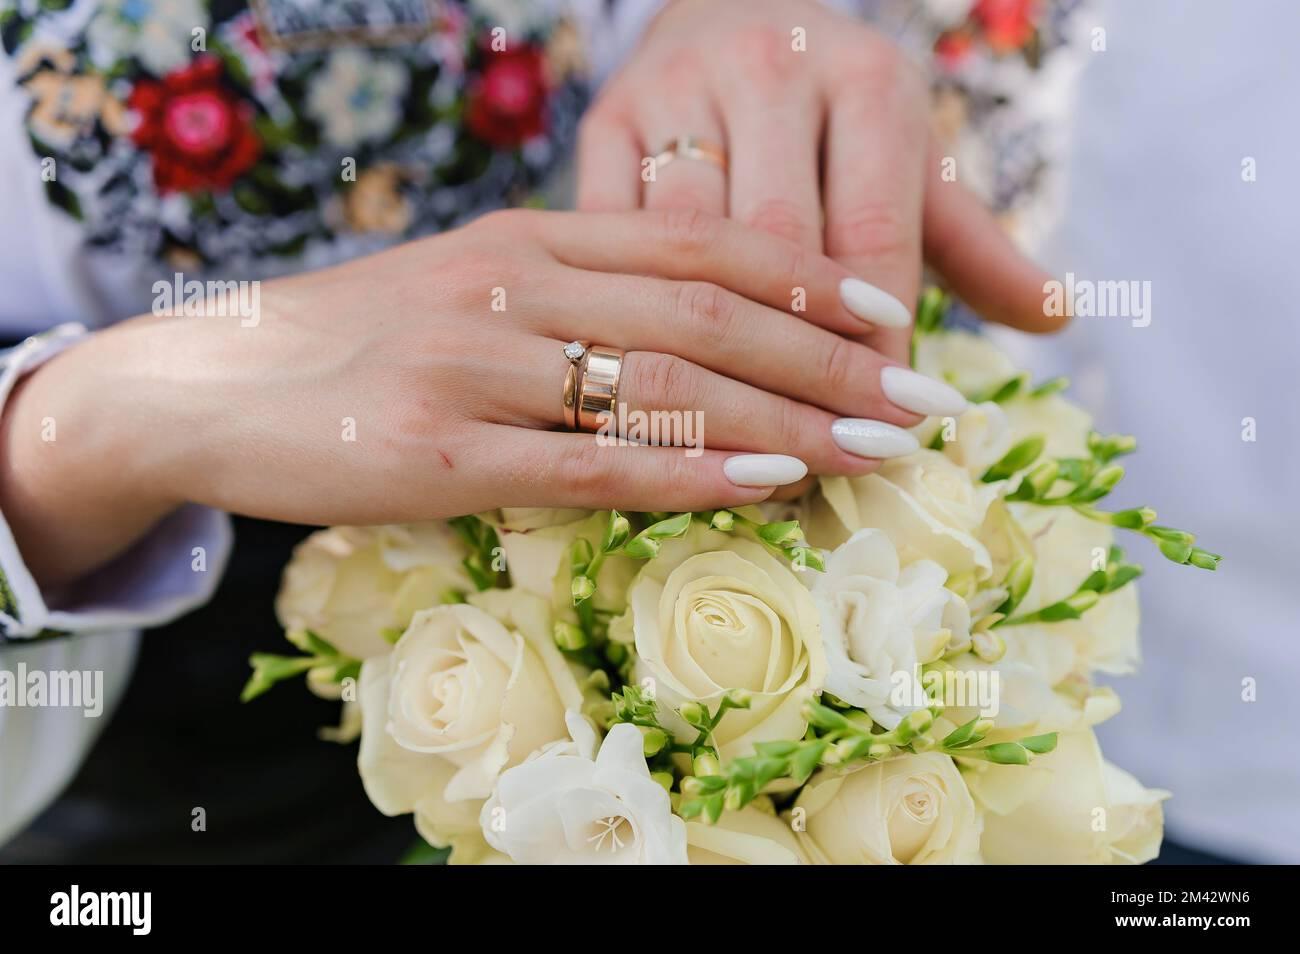 Golden Wedding Rings On The Hands Of Newlyweds Man And Woman